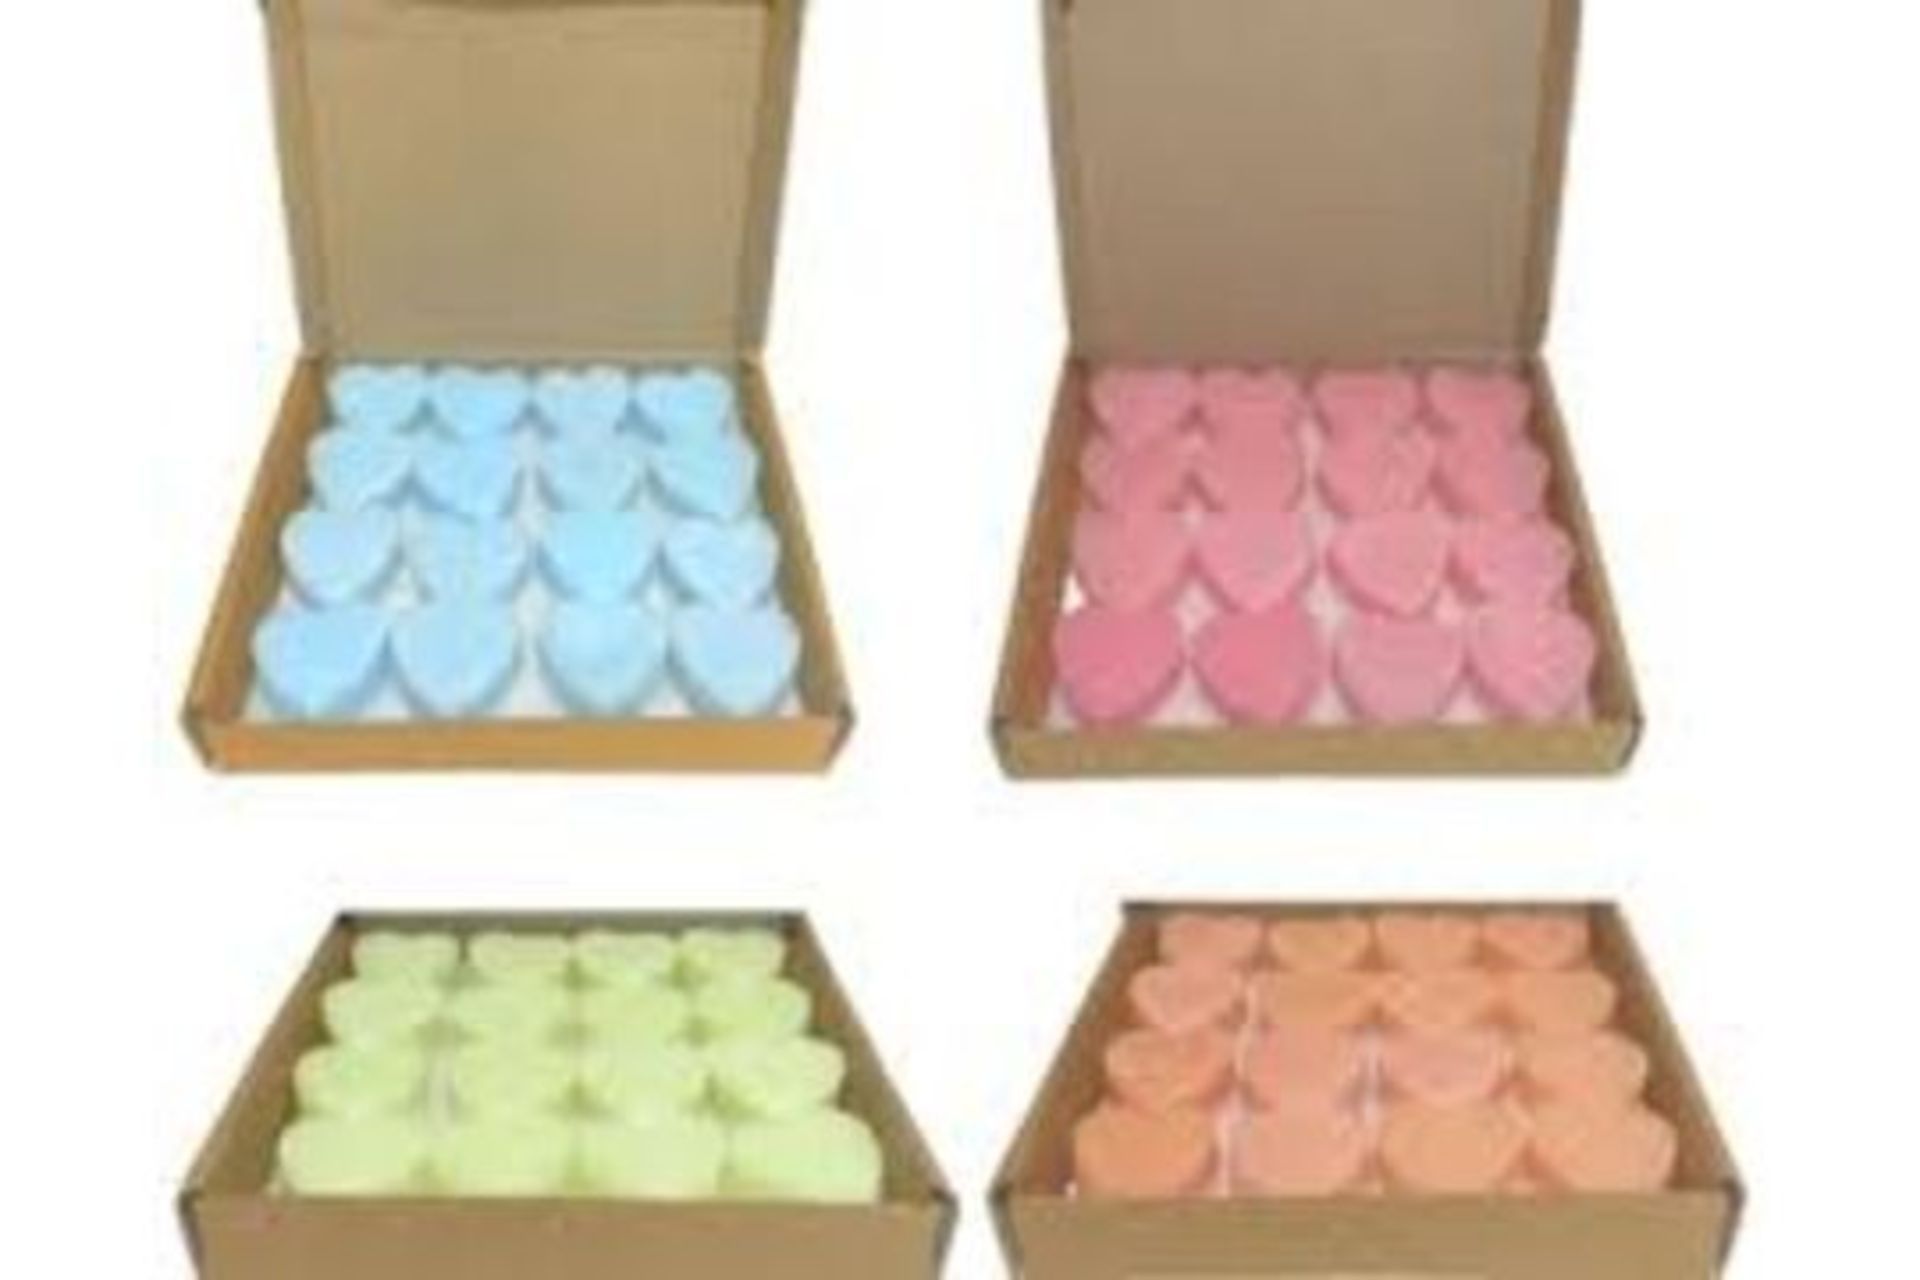 30 X BRAND NEW PACKS OF 16 HEART SHAPED 10G LAVENDER WAX MELTS S1RA - Image 2 of 2